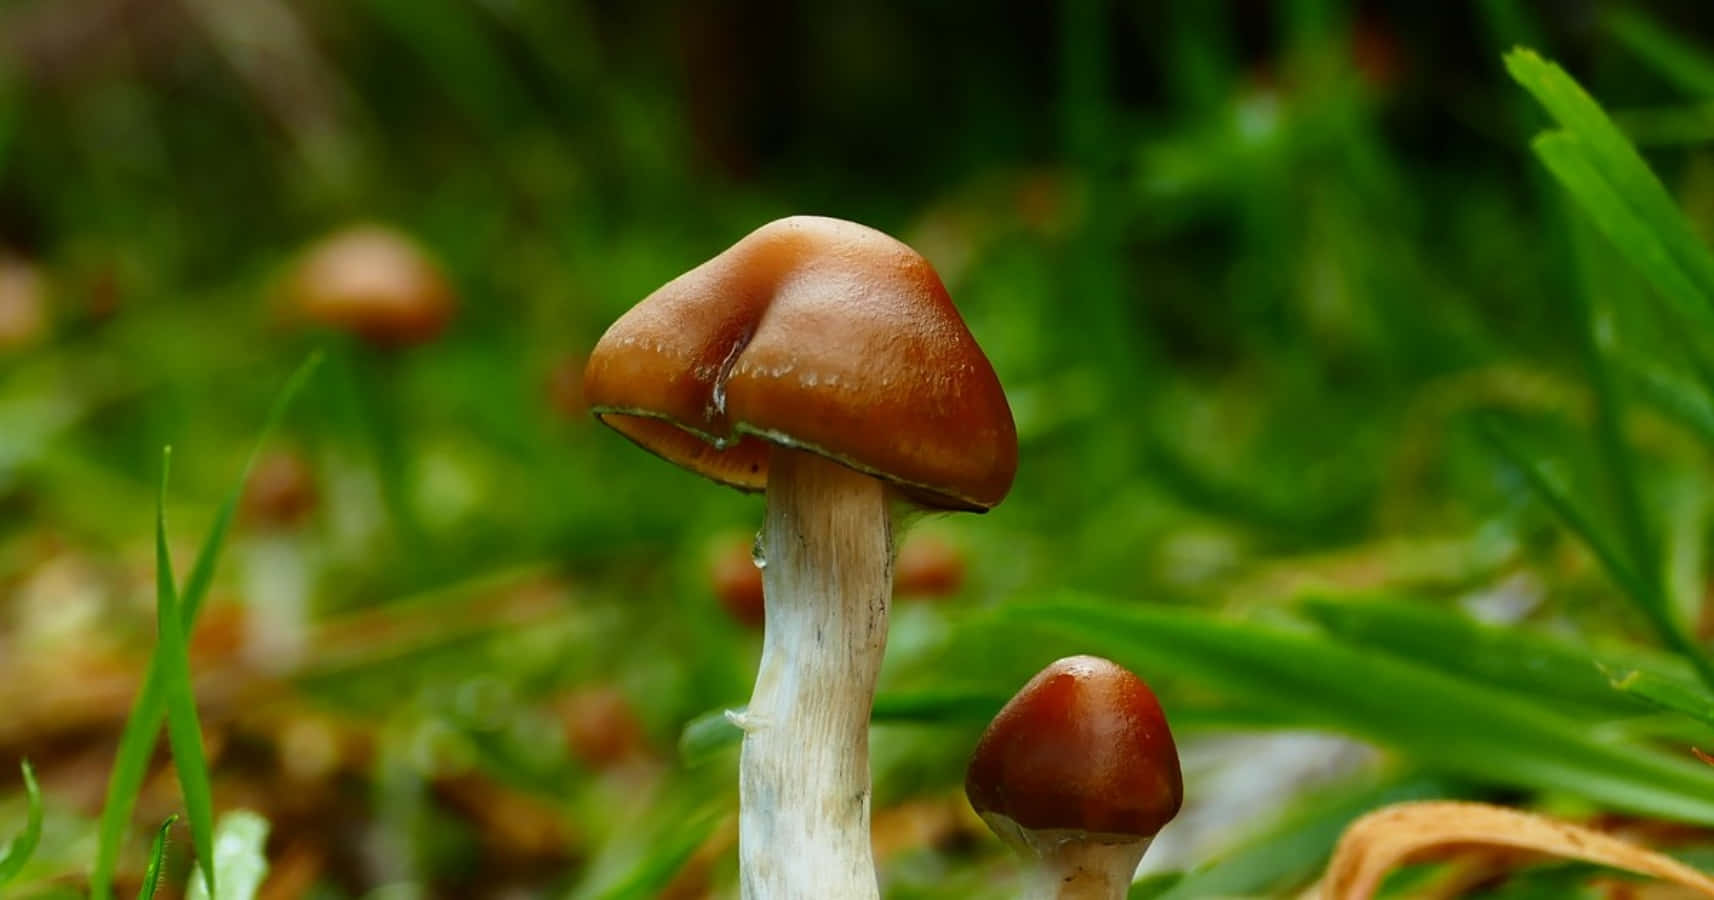 A vibrant mushroom that looks like it's from a magical place